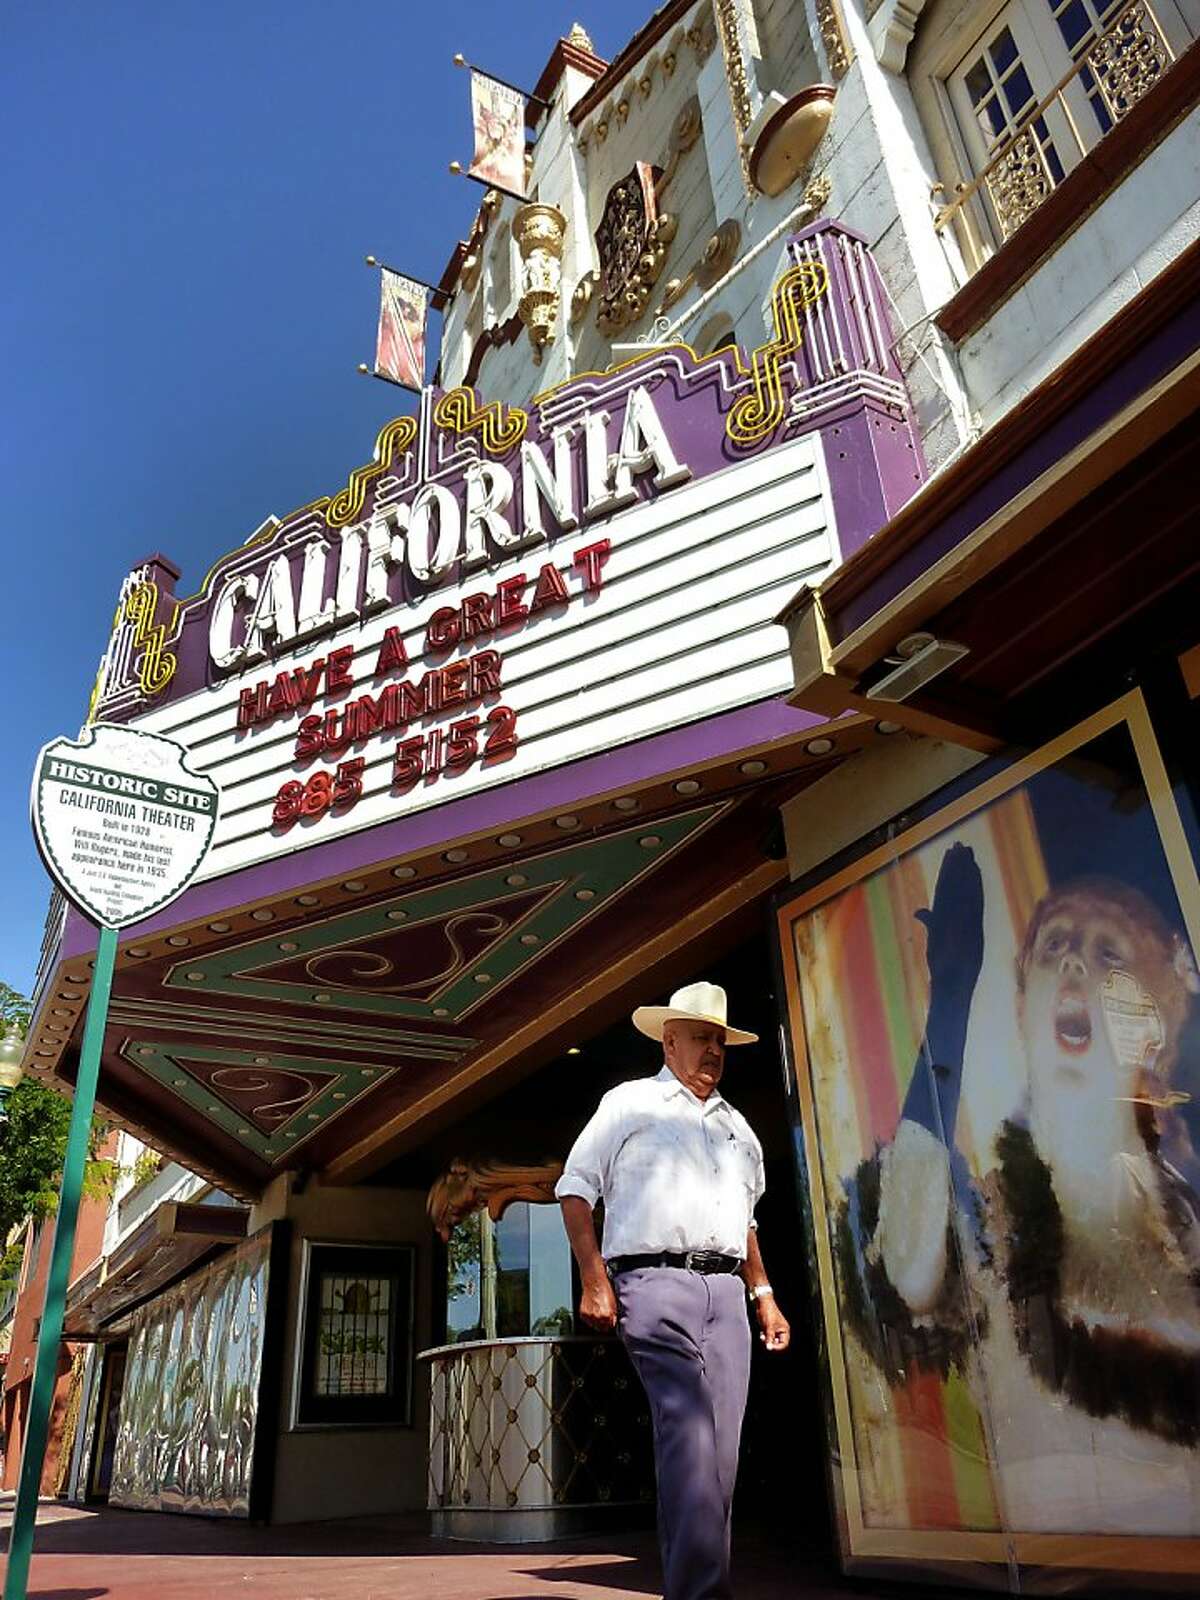 Restoring the California Theatre, built in 1928 as a vaudeville movie palace, seen here in a photo made Monday, Aug. 6, 2012, was one of the projects undertaken by the city of San Bernardino, Calif., before redevelopment agencies were shuttered across the state. The city, which filed for federal bankruptcy protection last week, says the loss of redevelopment funds make a tough financial situation worse. (AP Photo/Amy Taxin)